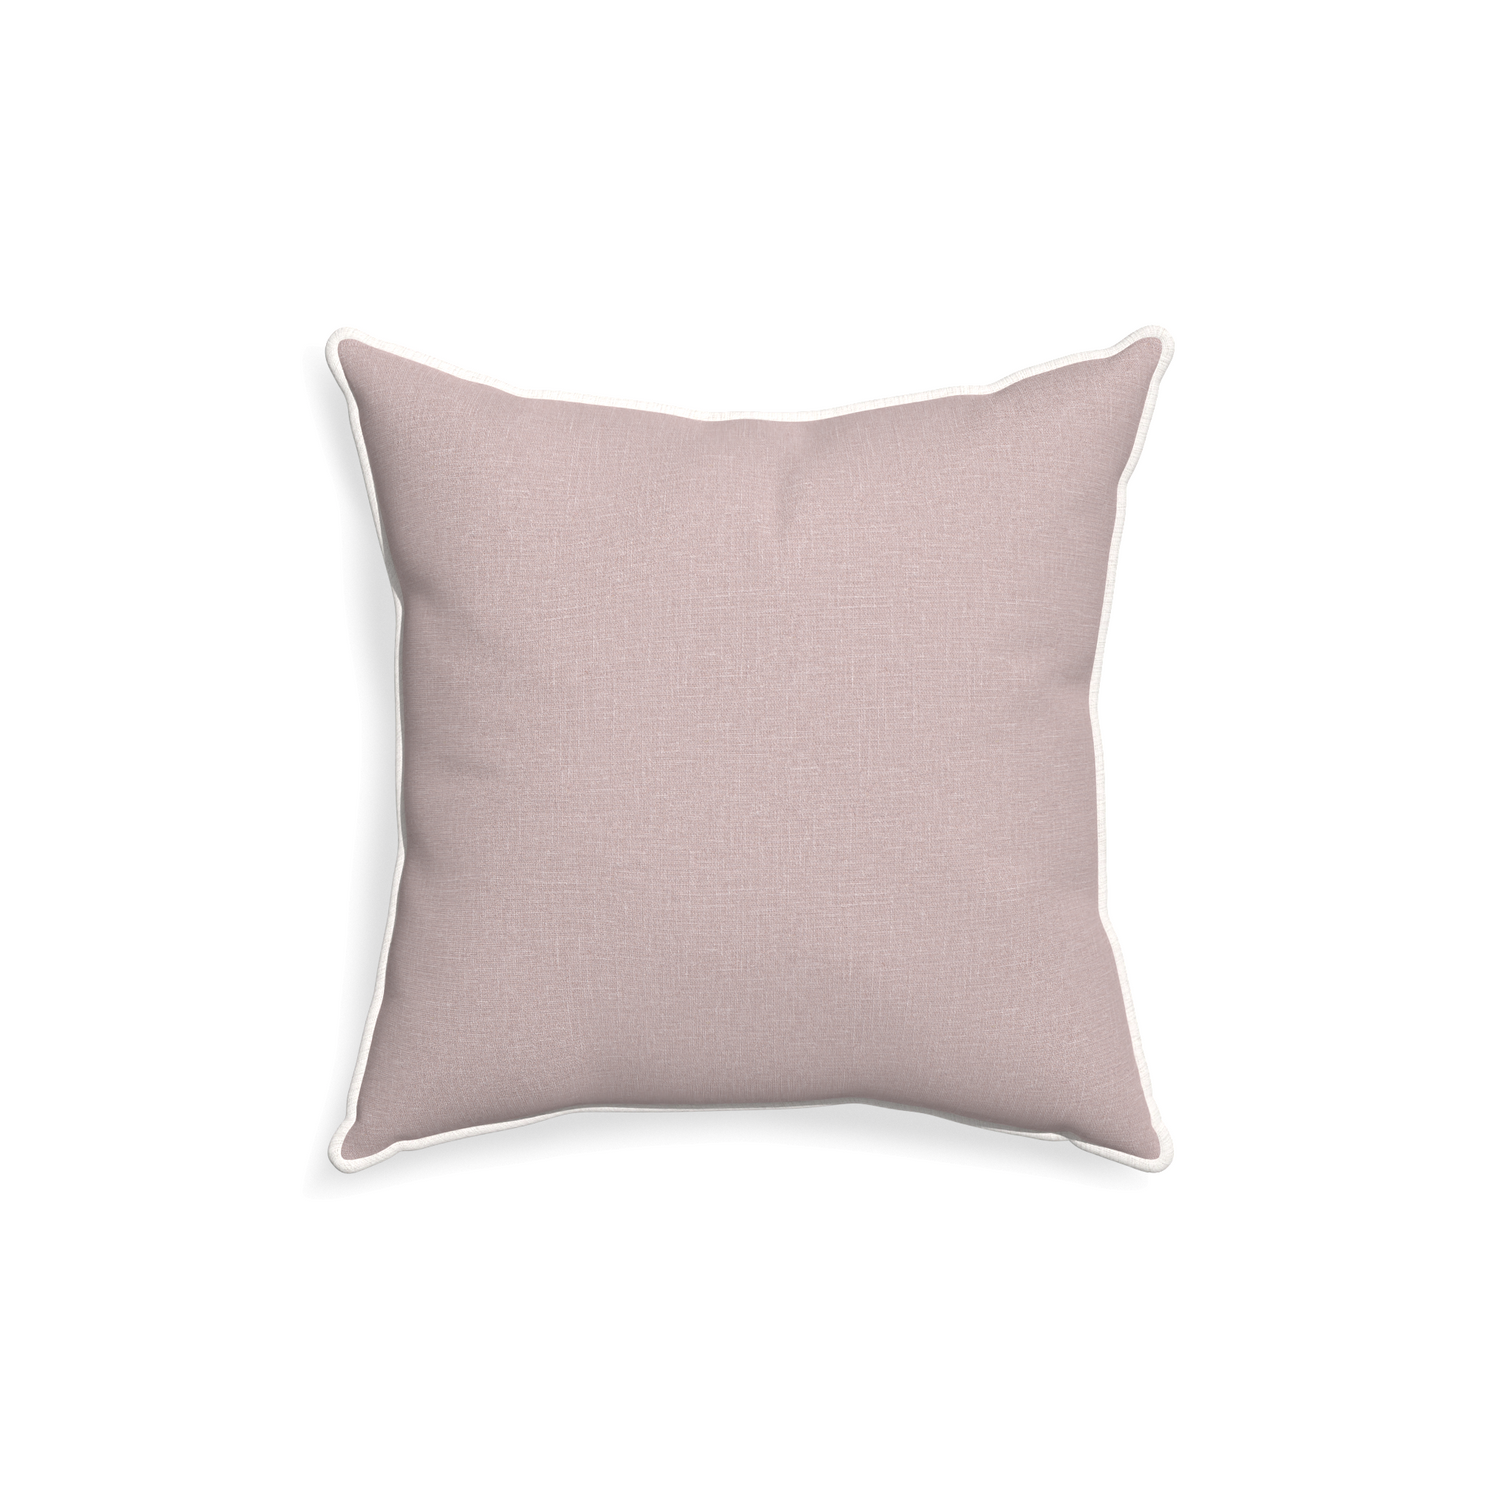 18-square orchid custom mauve pinkpillow with snow piping on white background